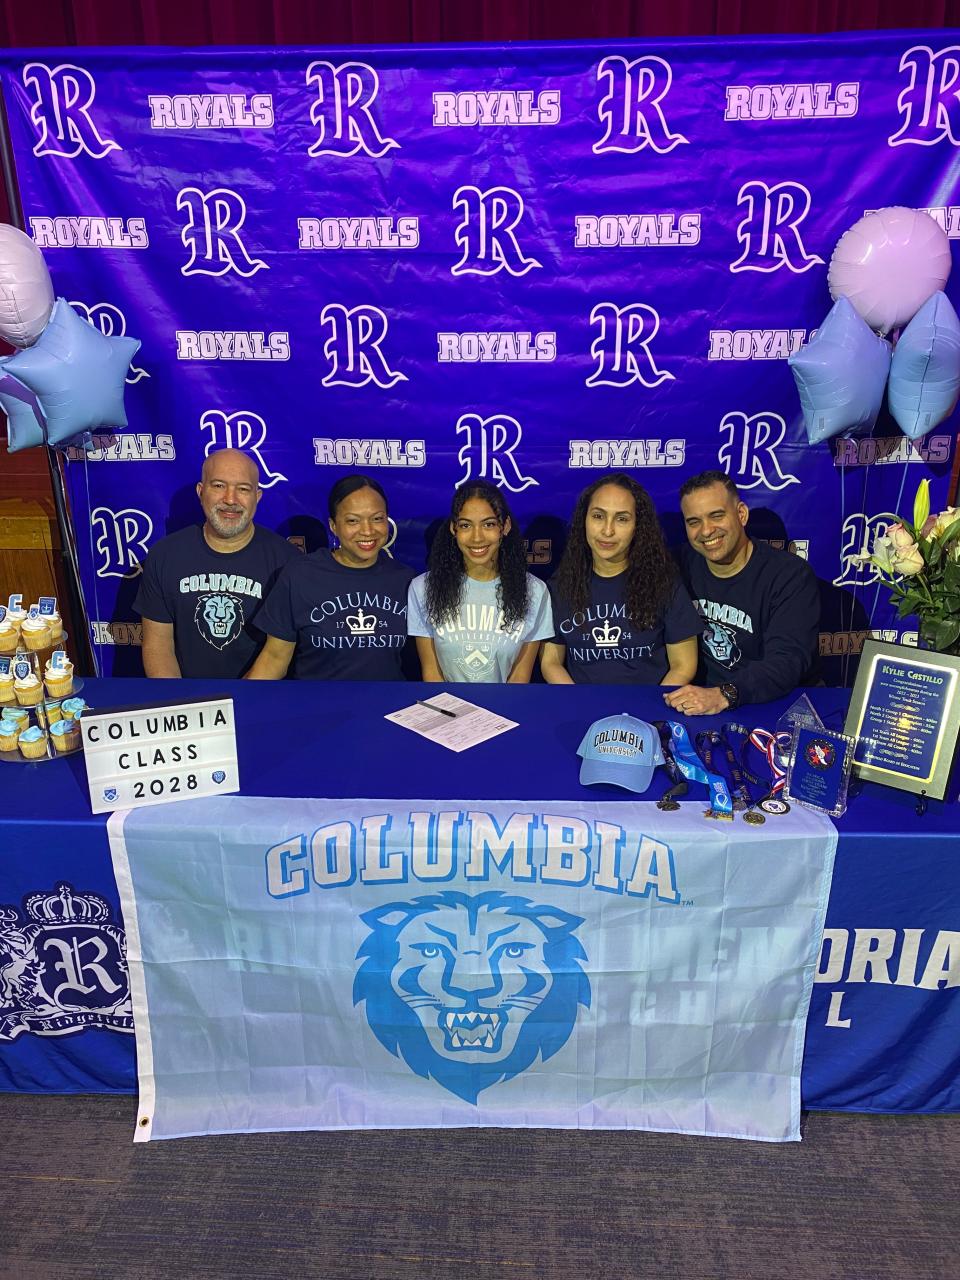 Ridgefield senior Kylie Castillo signed her letter of intent for Columbia University. She is joined by Cesar Heyaime, Audrey Young, Jessie Acevedo and Robin Castillo.